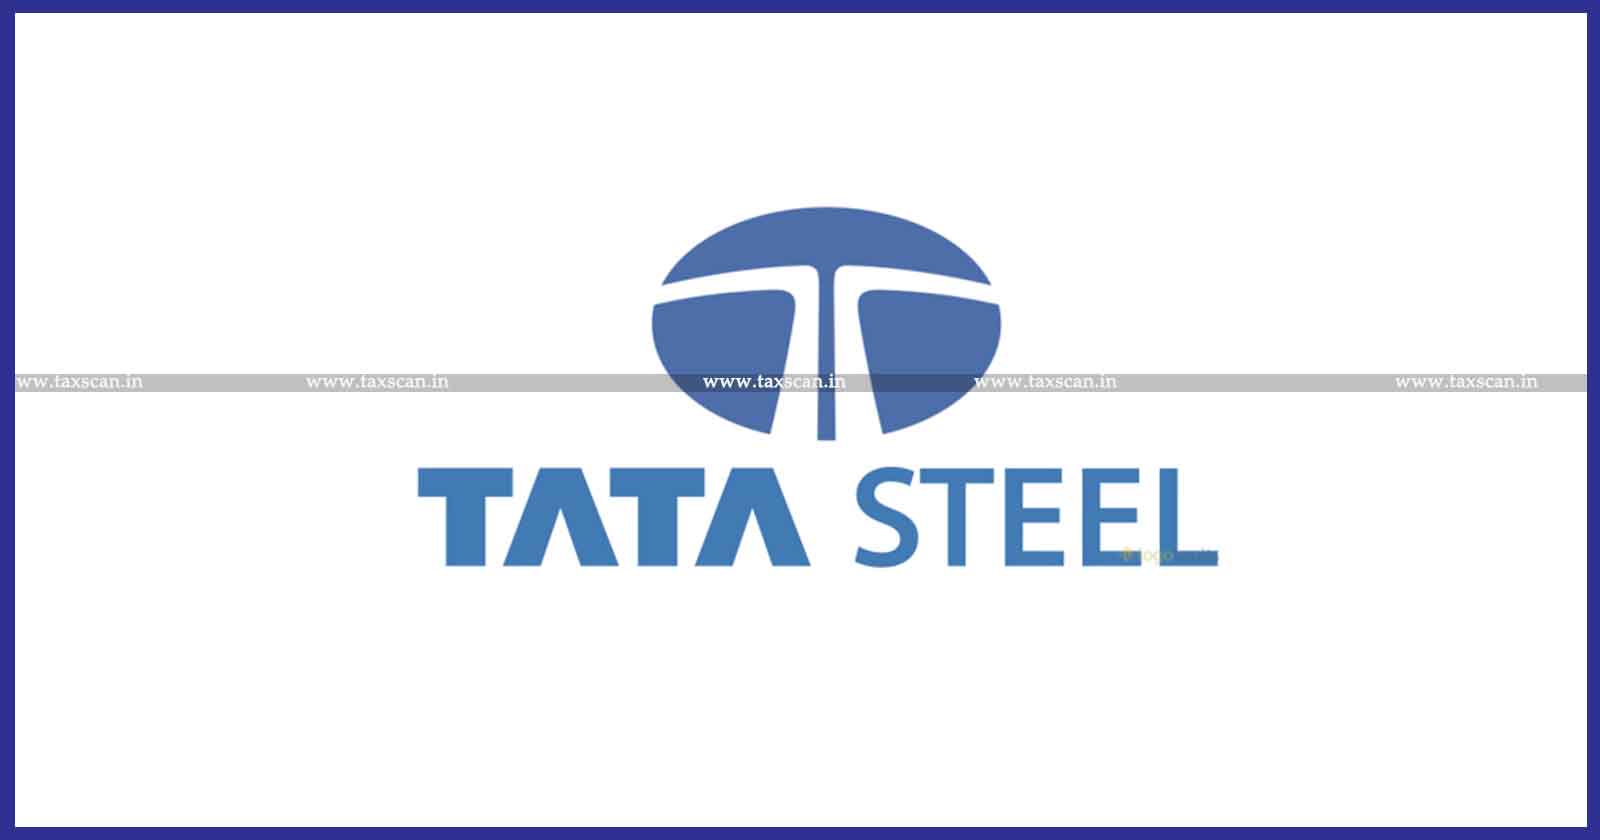 Tata Steel - CESTAT Quashes Customs Duty - Import of assemblies and sub-assemblies of Iron and steel under EPCG scheme - Non-Examination of Documentary Evidence - Customs Duty -Documentary Evidence - taxscan